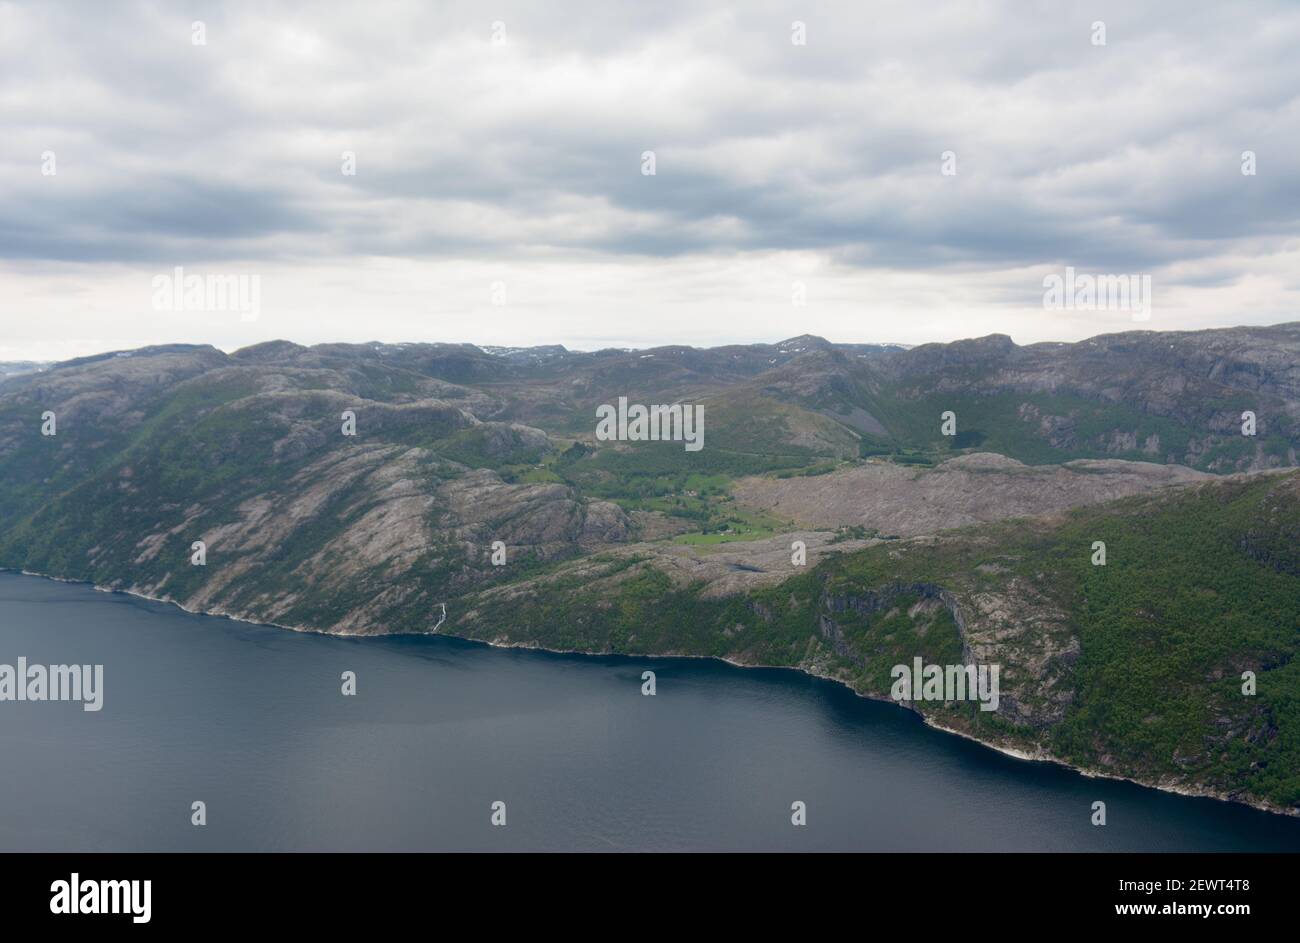 View of a landmass across the Lysefjorden on a dull overcast day from Preikestolen in Stavanger, Norway. Stock Photo